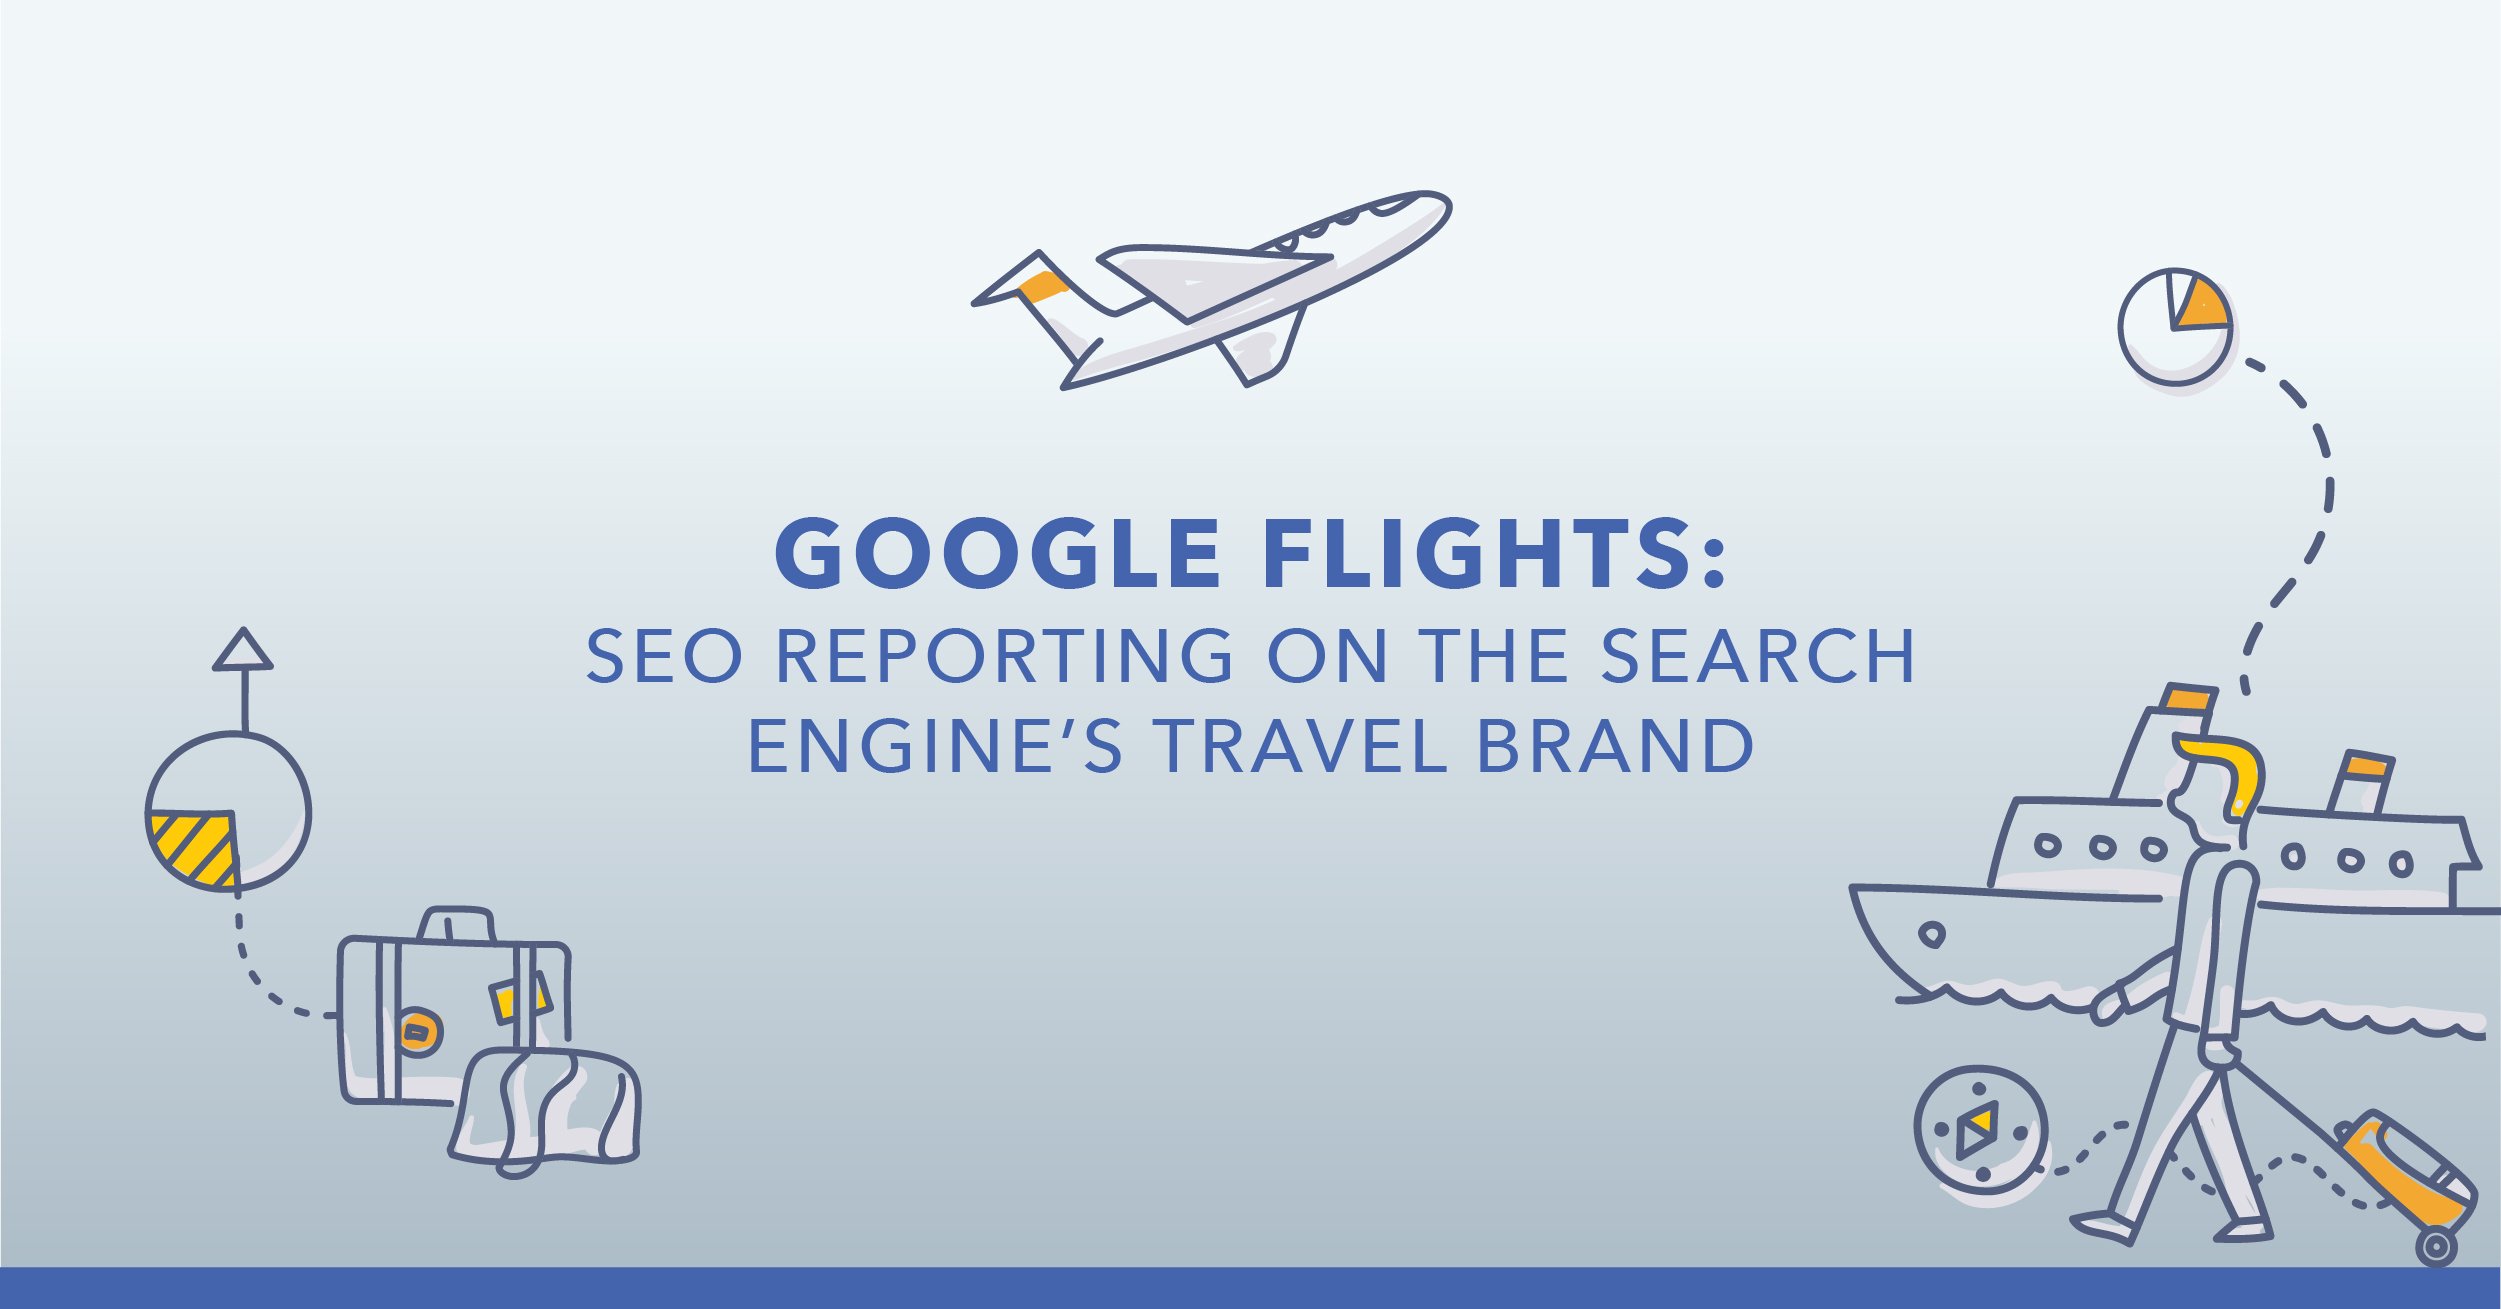 Google Flights SEO Reporting On The Search Engine's Travel Brand